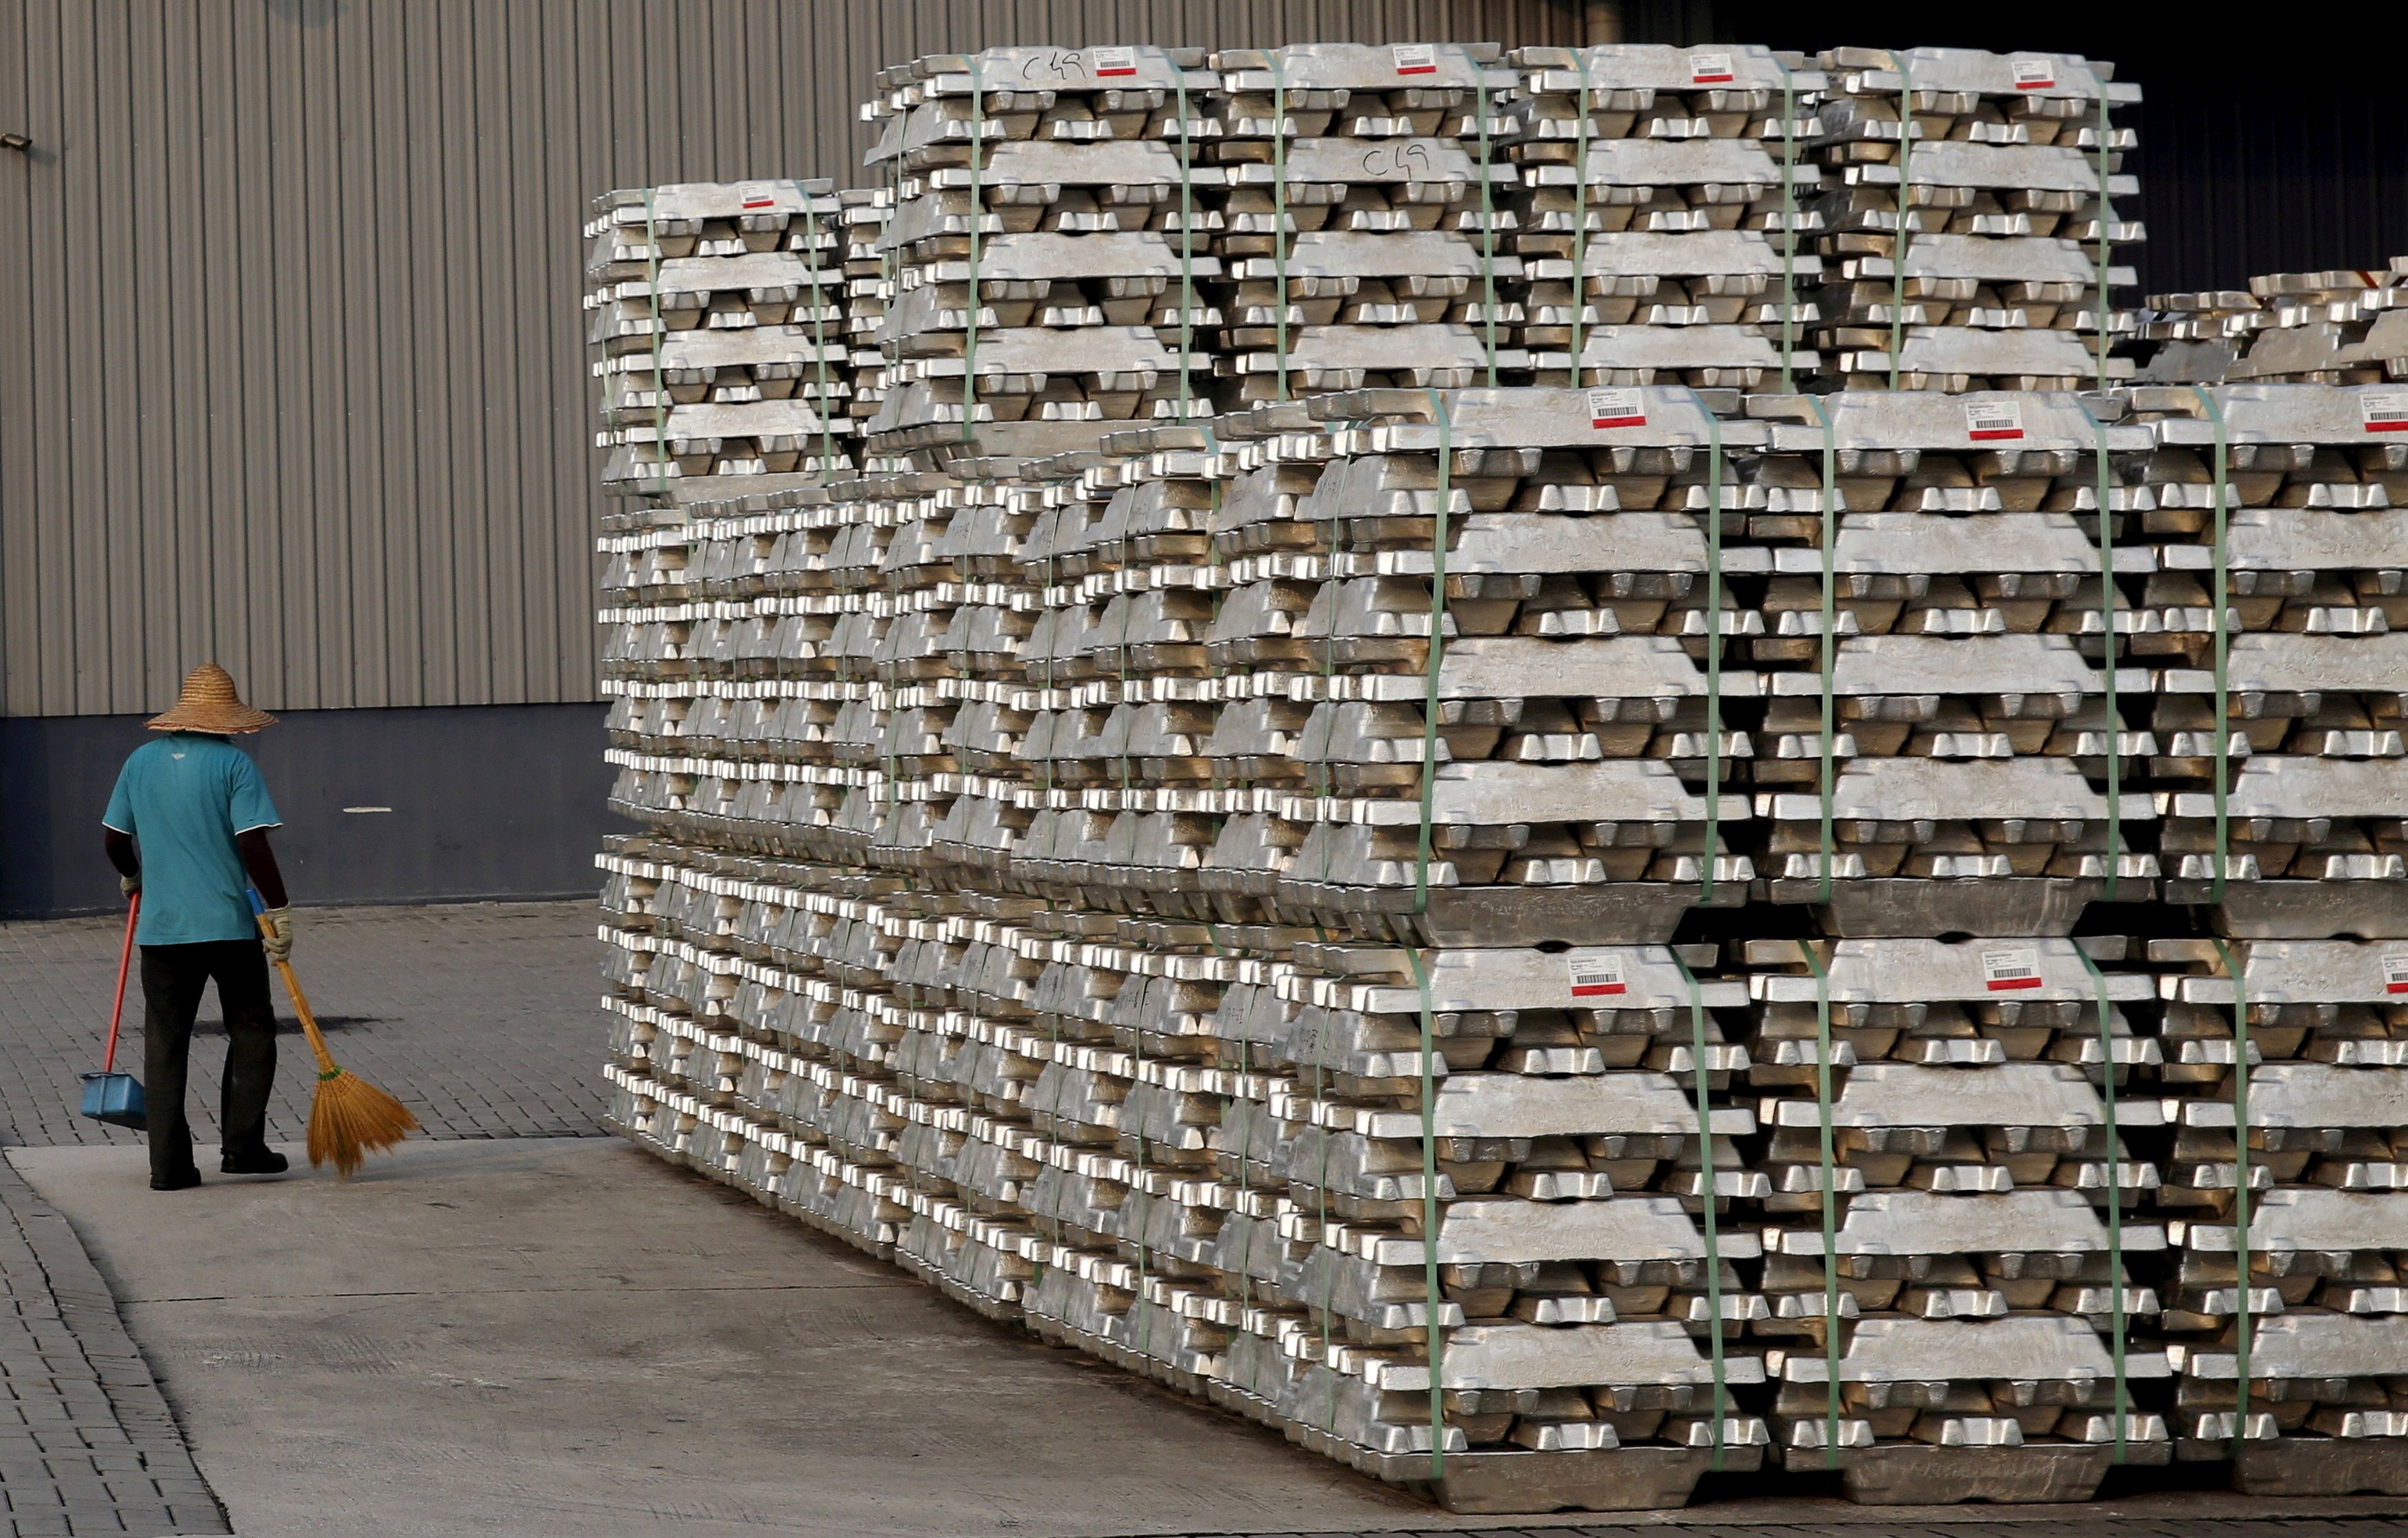 Aluminium scarcity in Europe will further erode 17-year low LME stocks